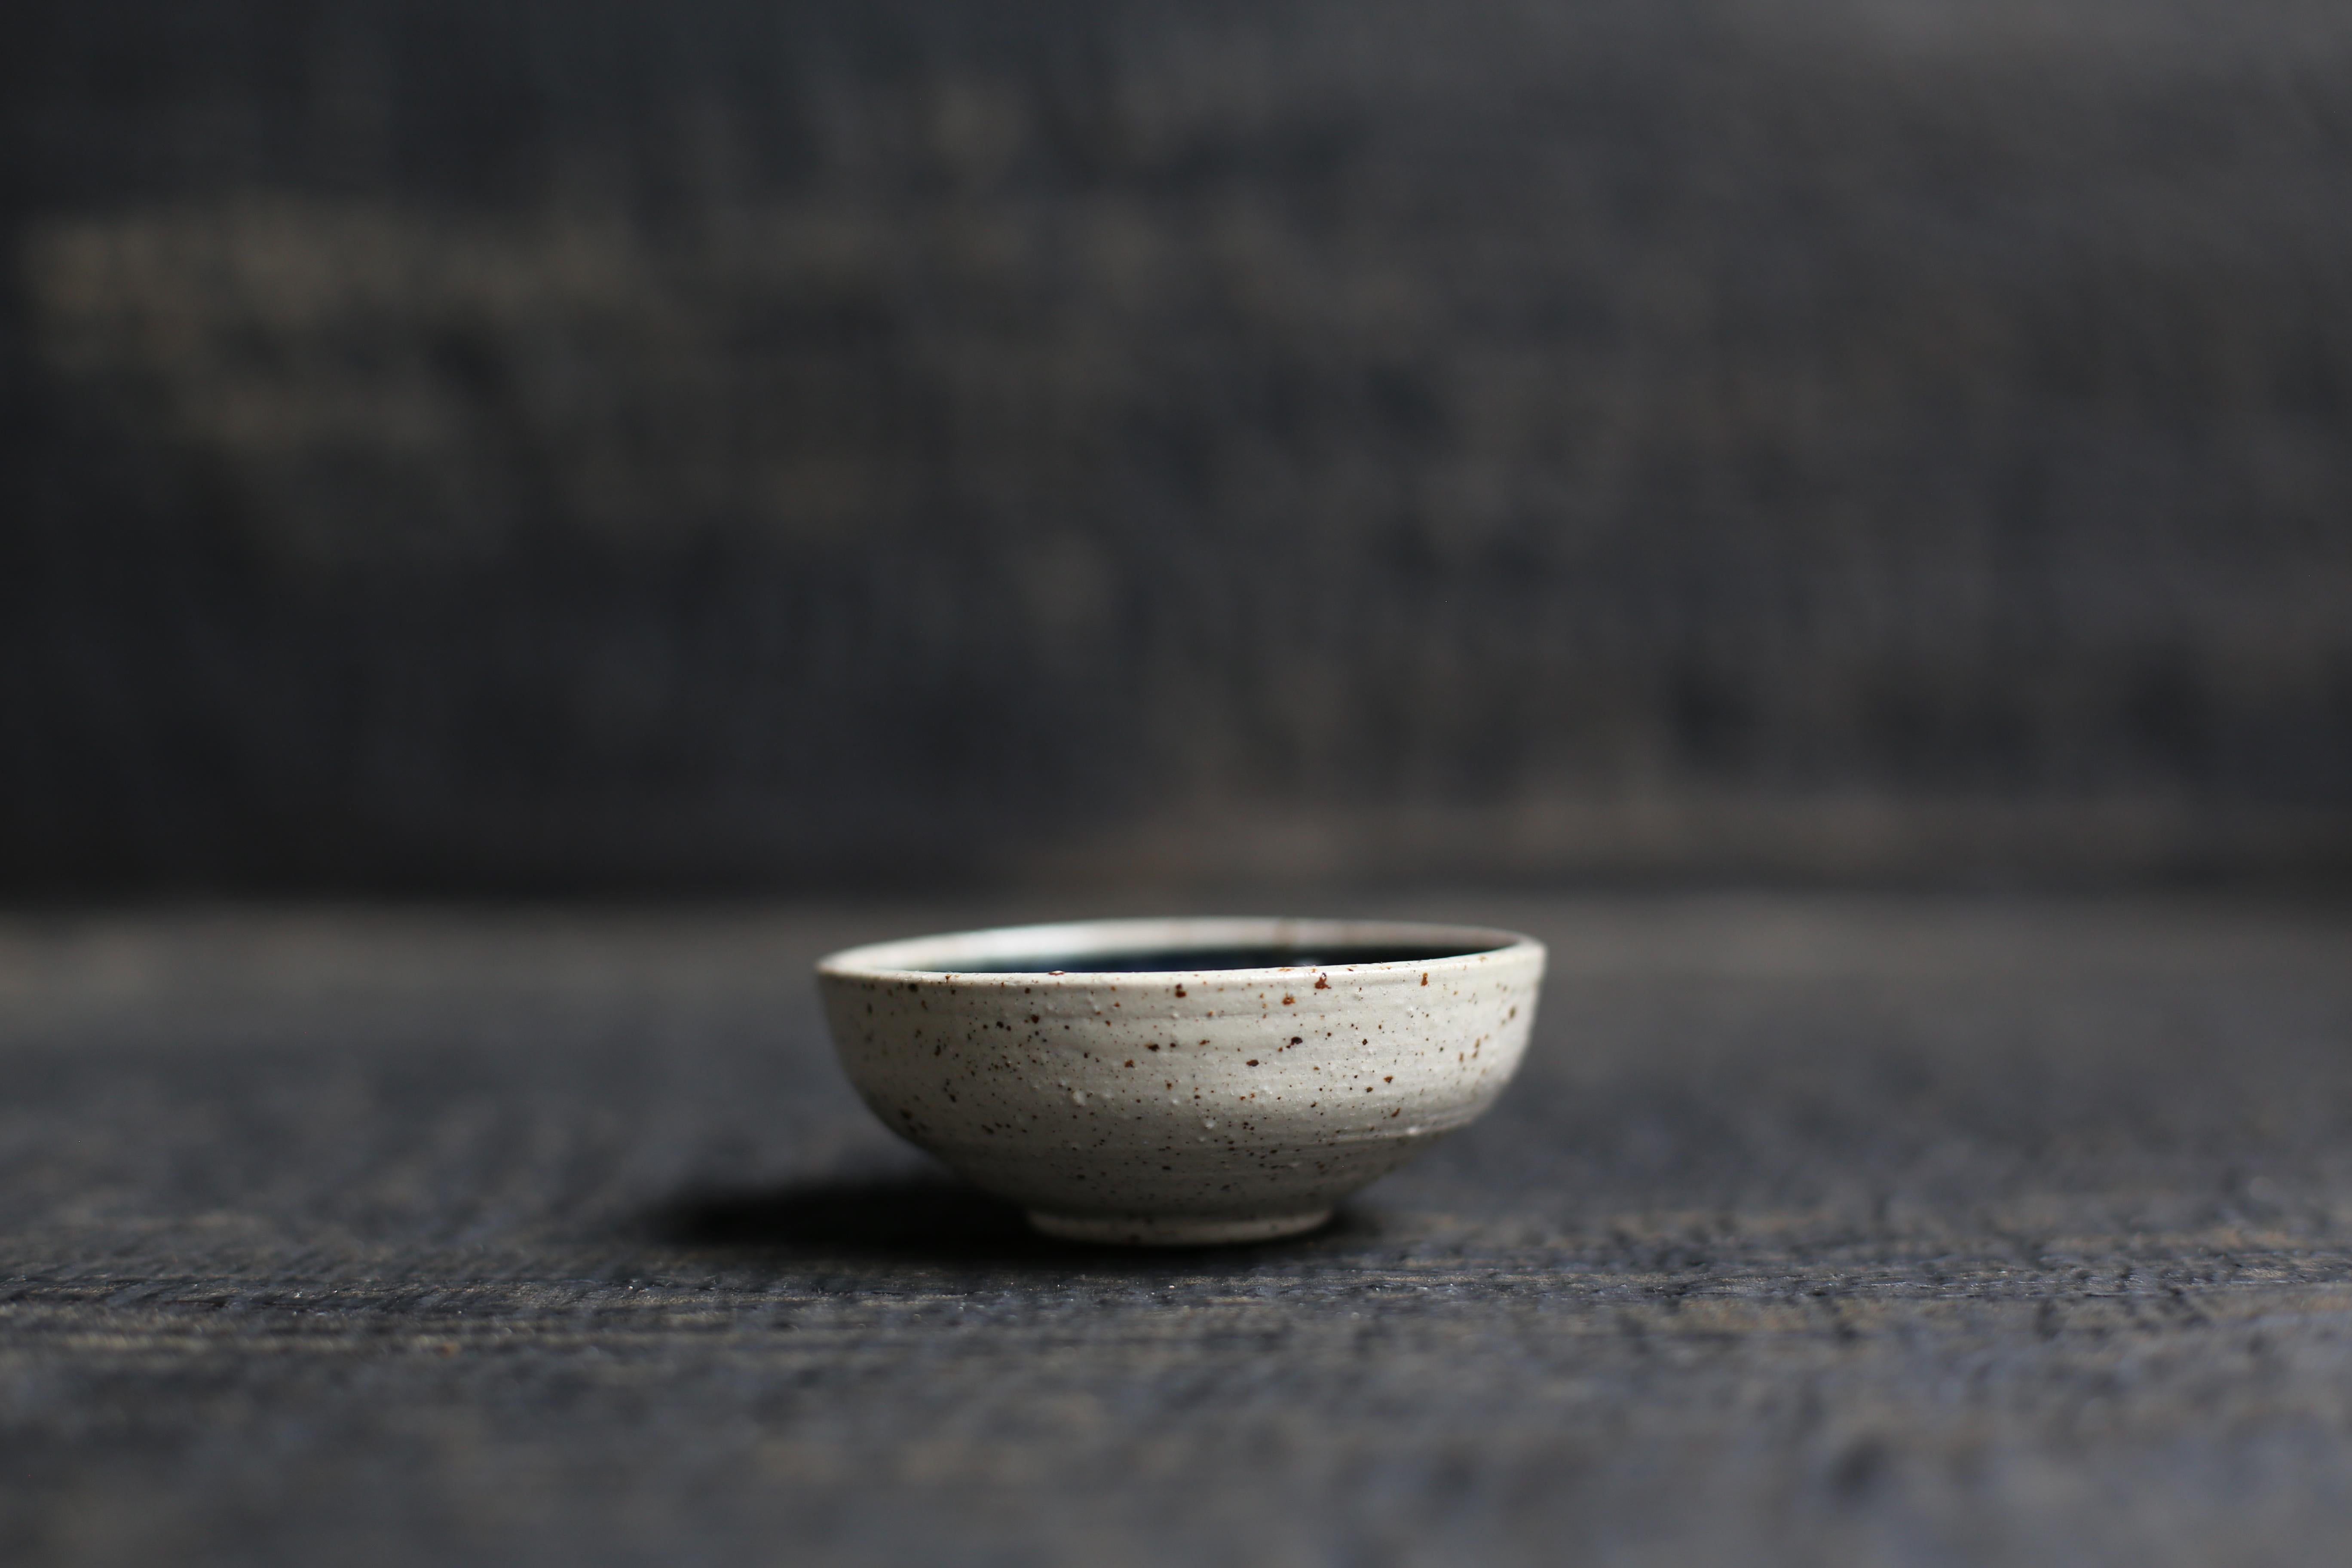 A small bowl in speckled clay + matte midnight blue glaze
2022s / Belgium
Size : f80 h35 mm
Artist : Sigrid Volders


[Sigrid Volders]
Based in Antwerp, Belgium, she works vigorously as a ceramic artist, mainly as a hair-making artist active